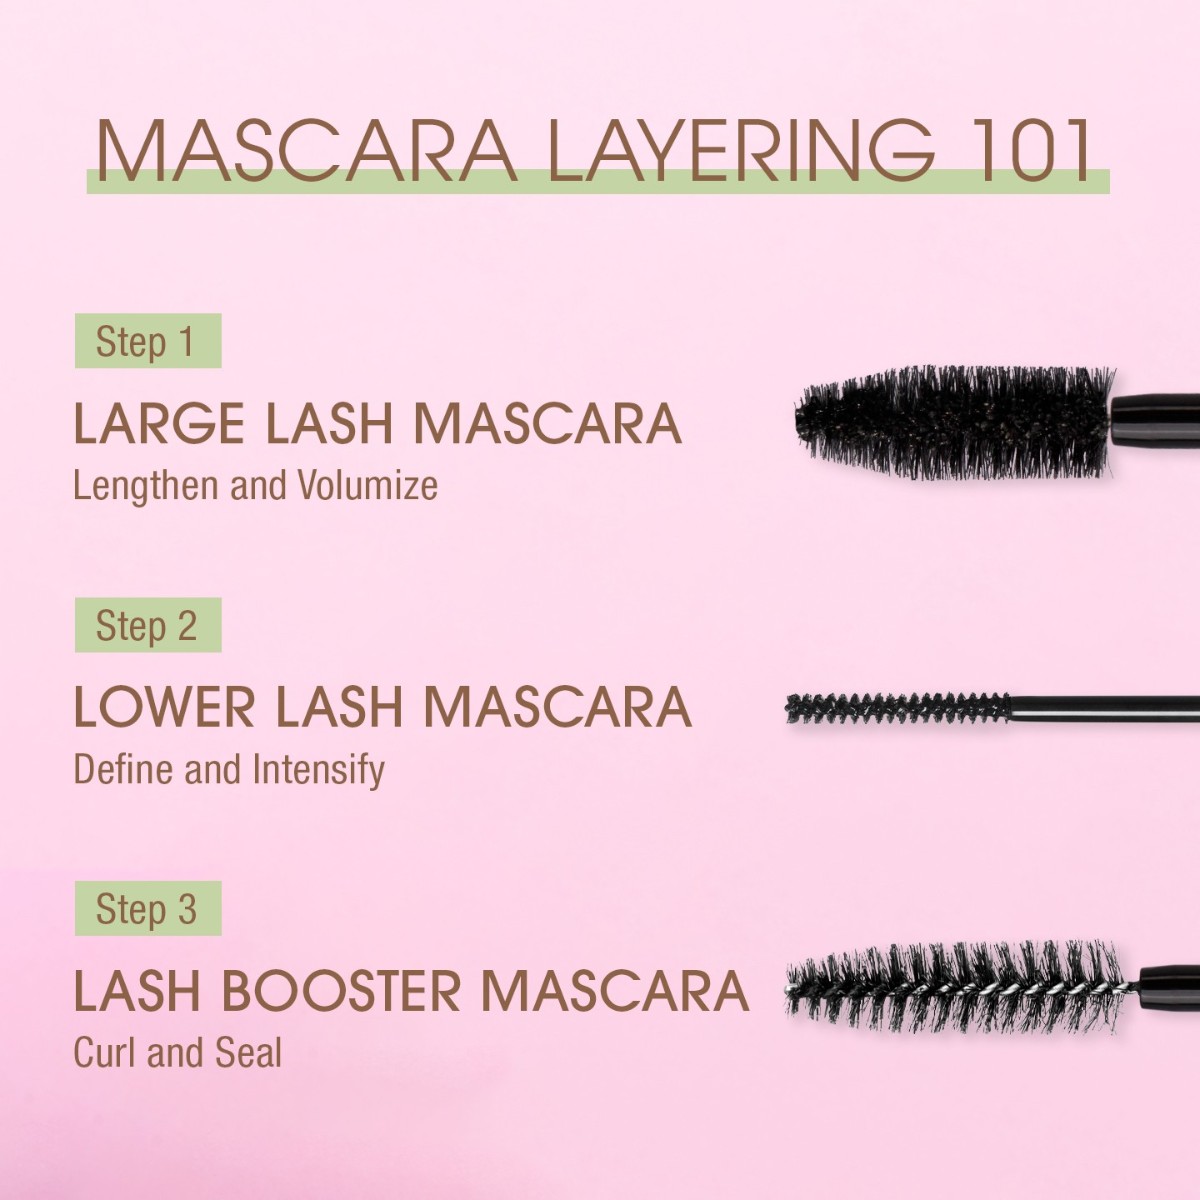 Layer up for lash-lushness! Infused with Vitamins and Botanical extracts to treat as you wear! ✨ How to #MascaraLayer: 💚 Large Lash Mascara lengthens and volumizes 💚 Lower Lash Mascara defines and intensifies 💚 Lash Booster Mascara curls and seals #PixiBeauty #Makeup